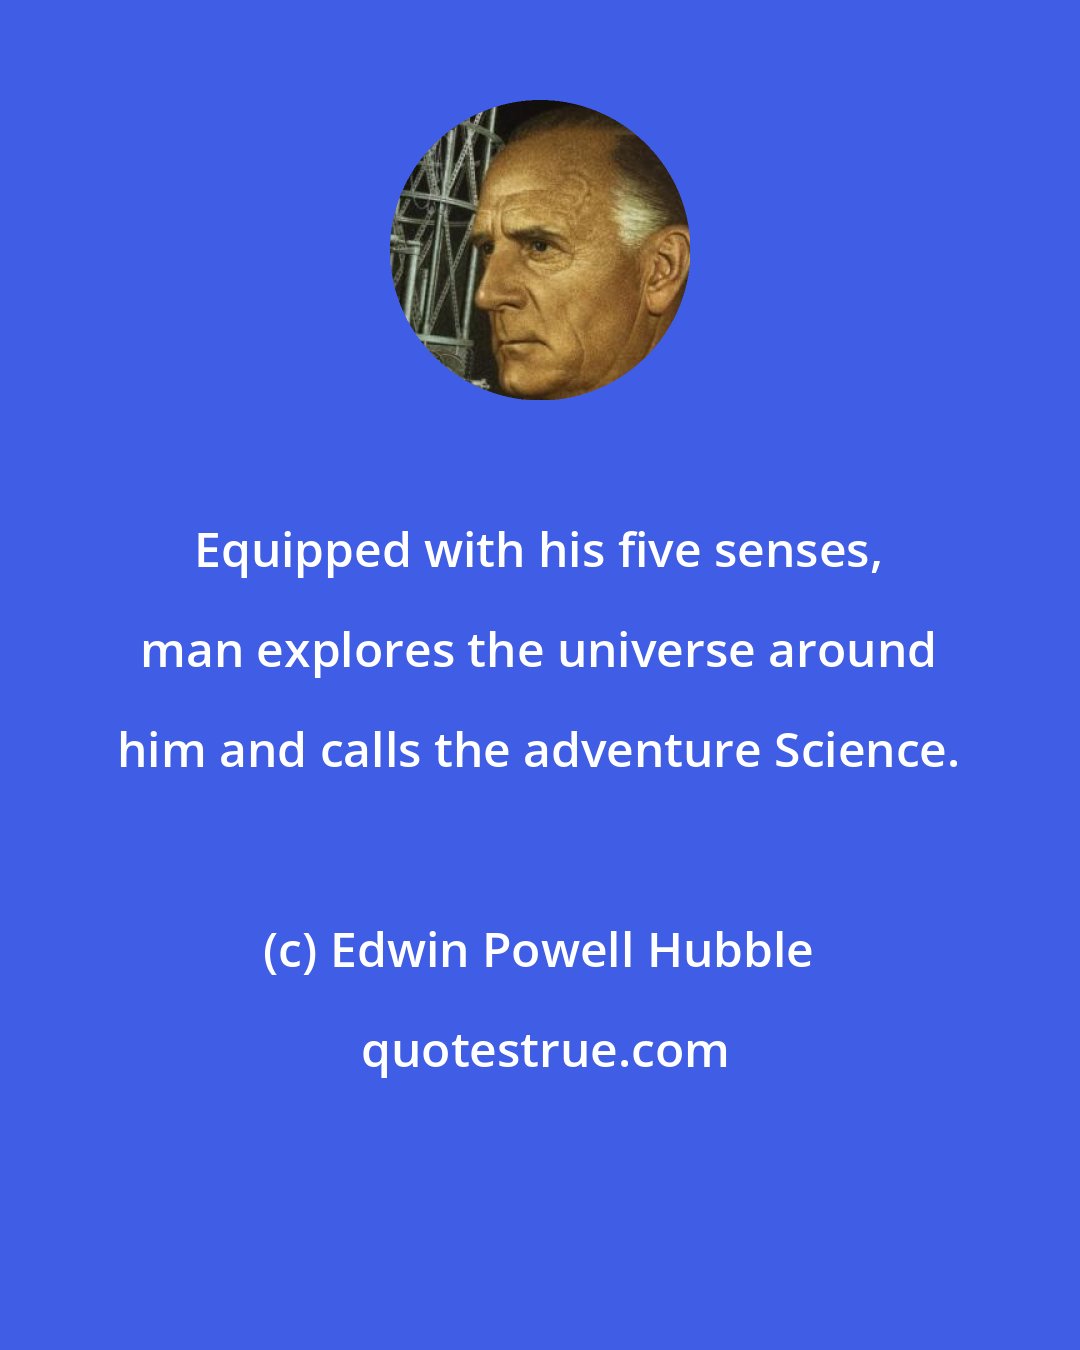 Edwin Powell Hubble: Equipped with his five senses, man explores the universe around him and calls the adventure Science.